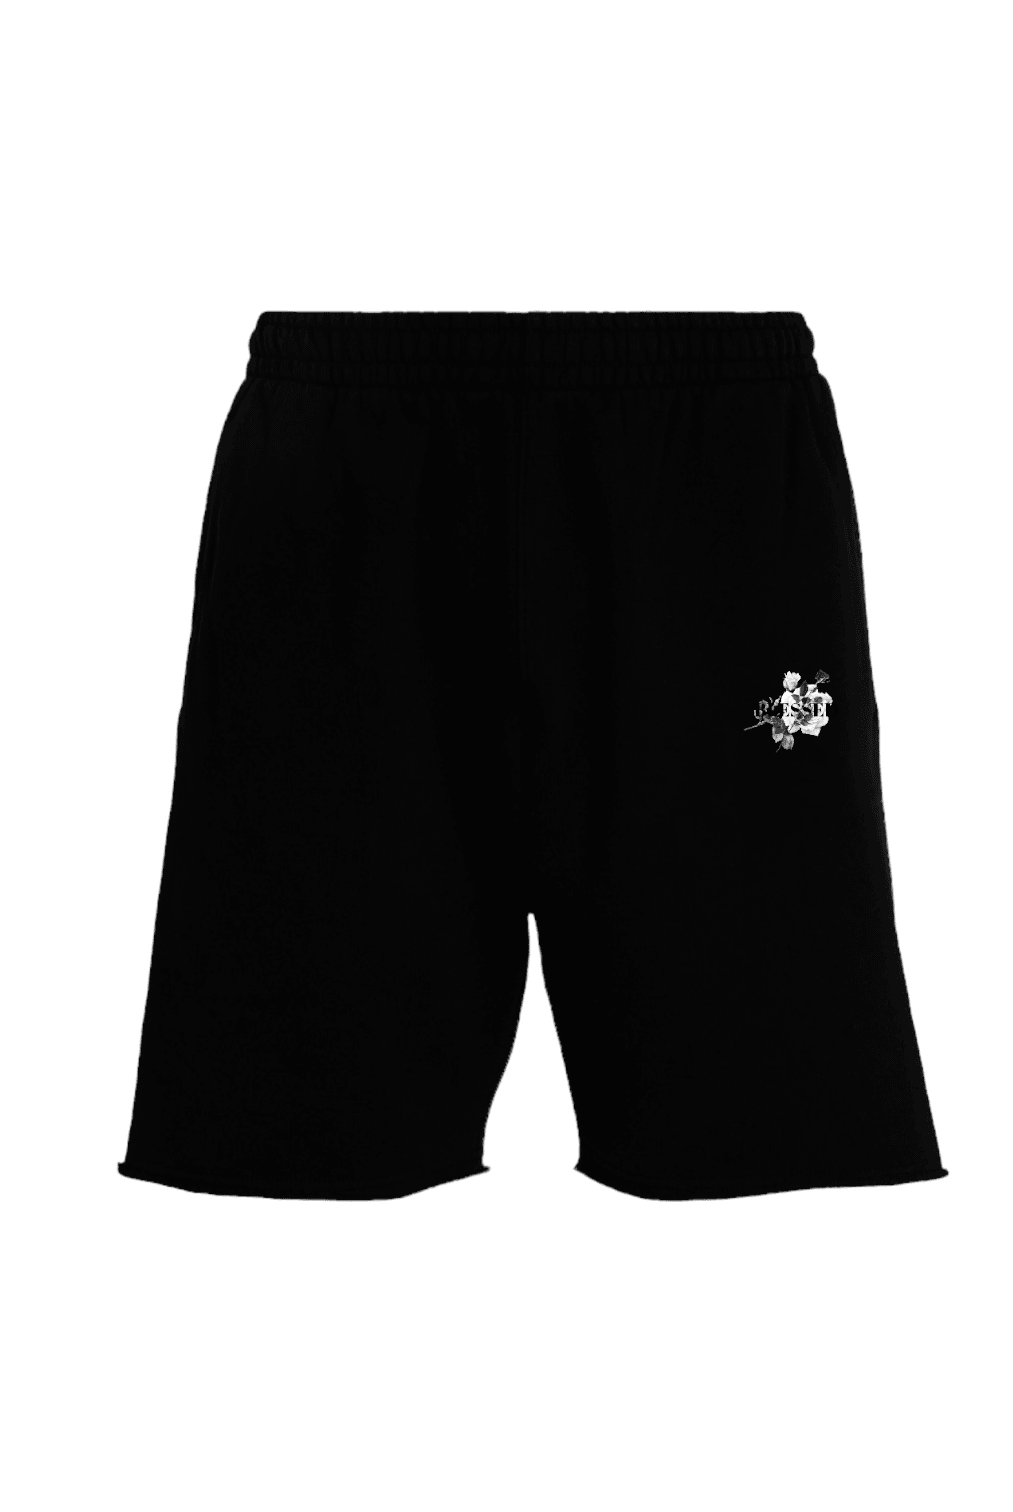 BLACK BLESSED GRAPHIC SHORT - MICH & JANE